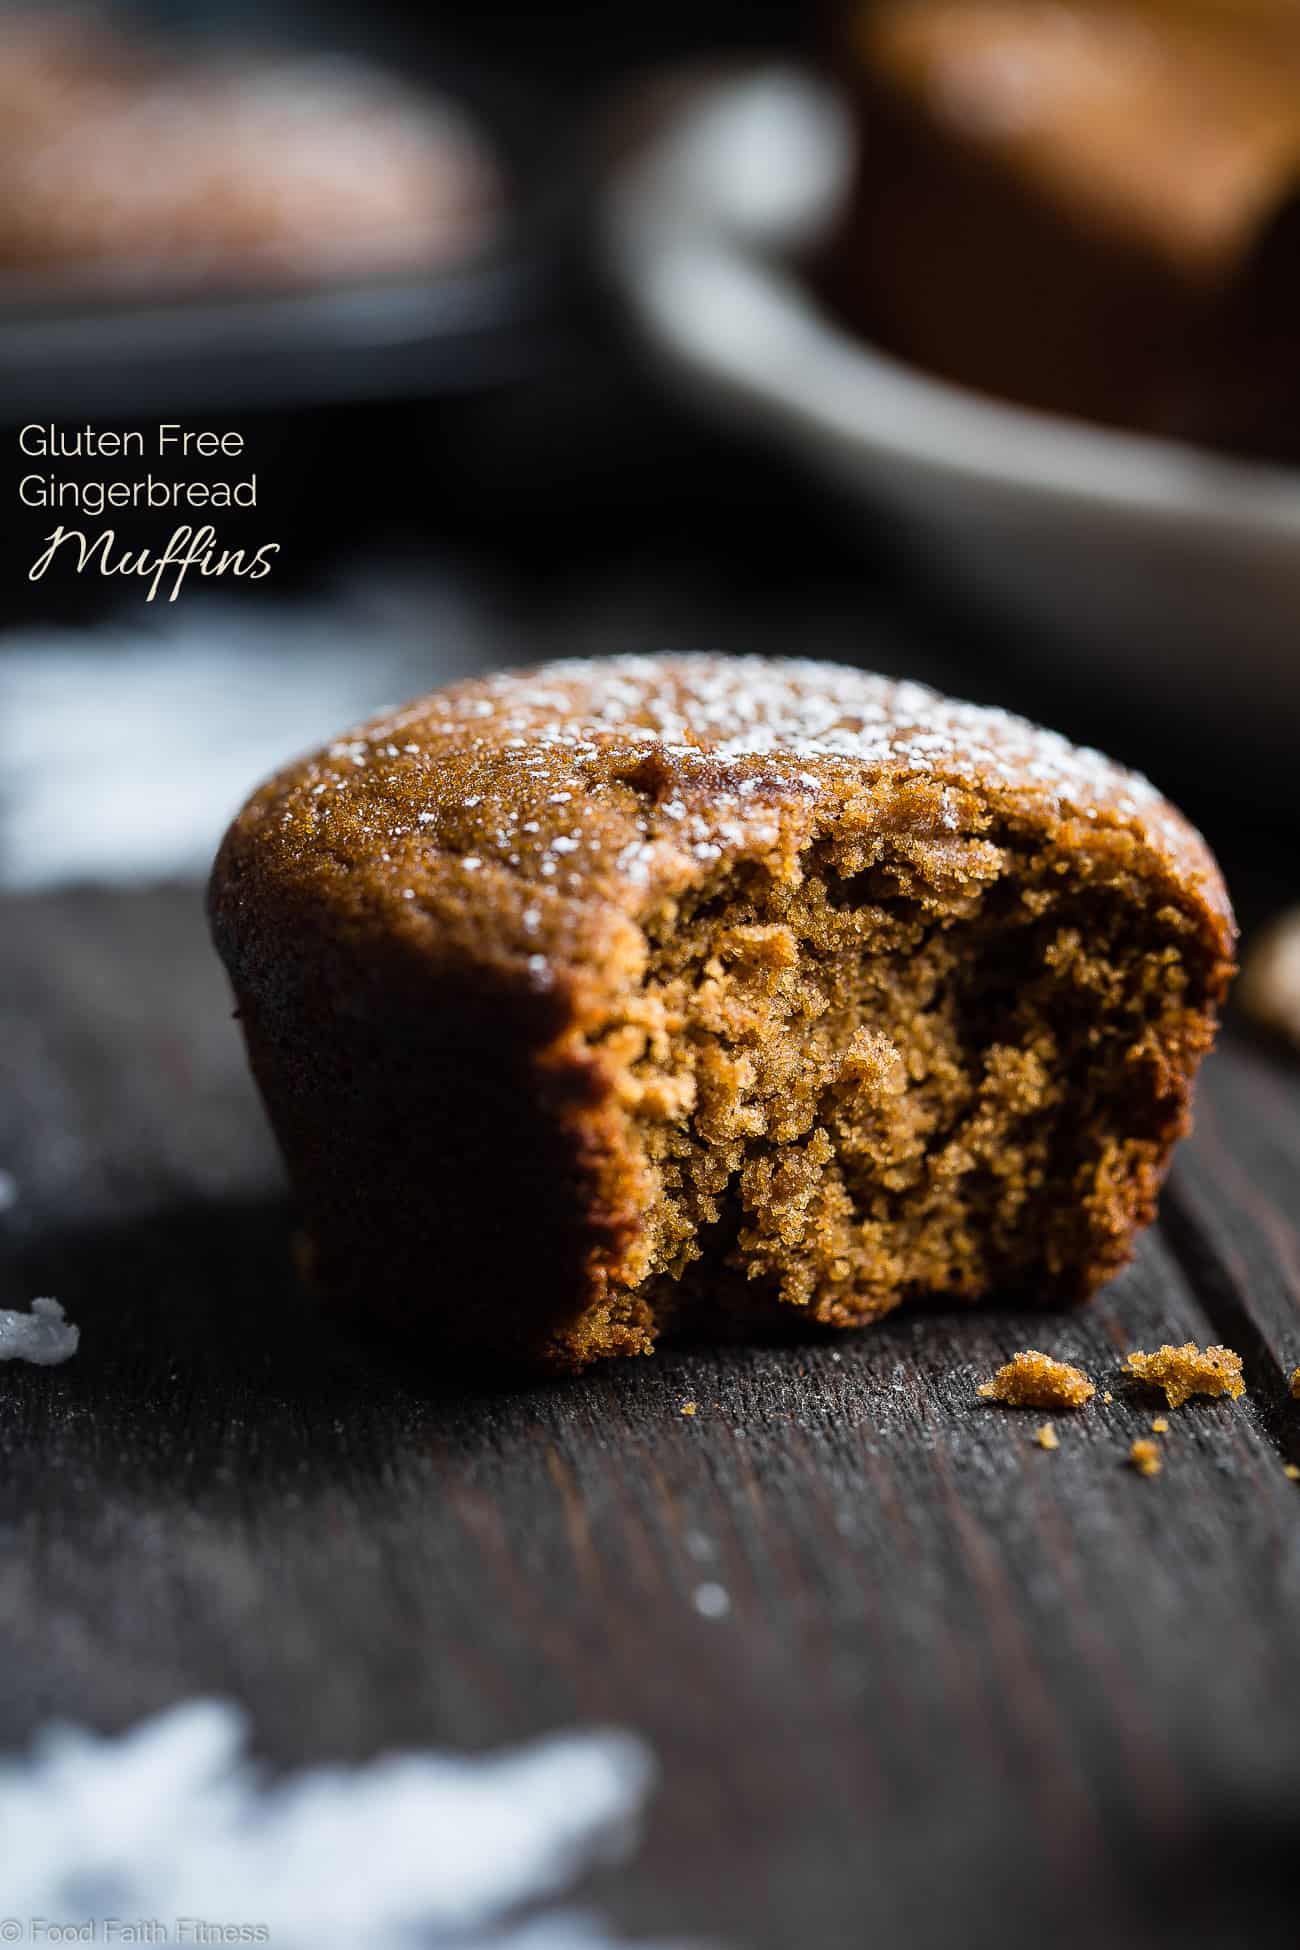  The BEST Healthy Gluten Free Gingerbread Muffins  - This truly is the best healthy gingerbread muffin recipe! Dairy and egg free, vegan friendly and only 5 ingredients and perfect for Christmas morning! | Foodfaithfitness.com | @FoodFaithFit